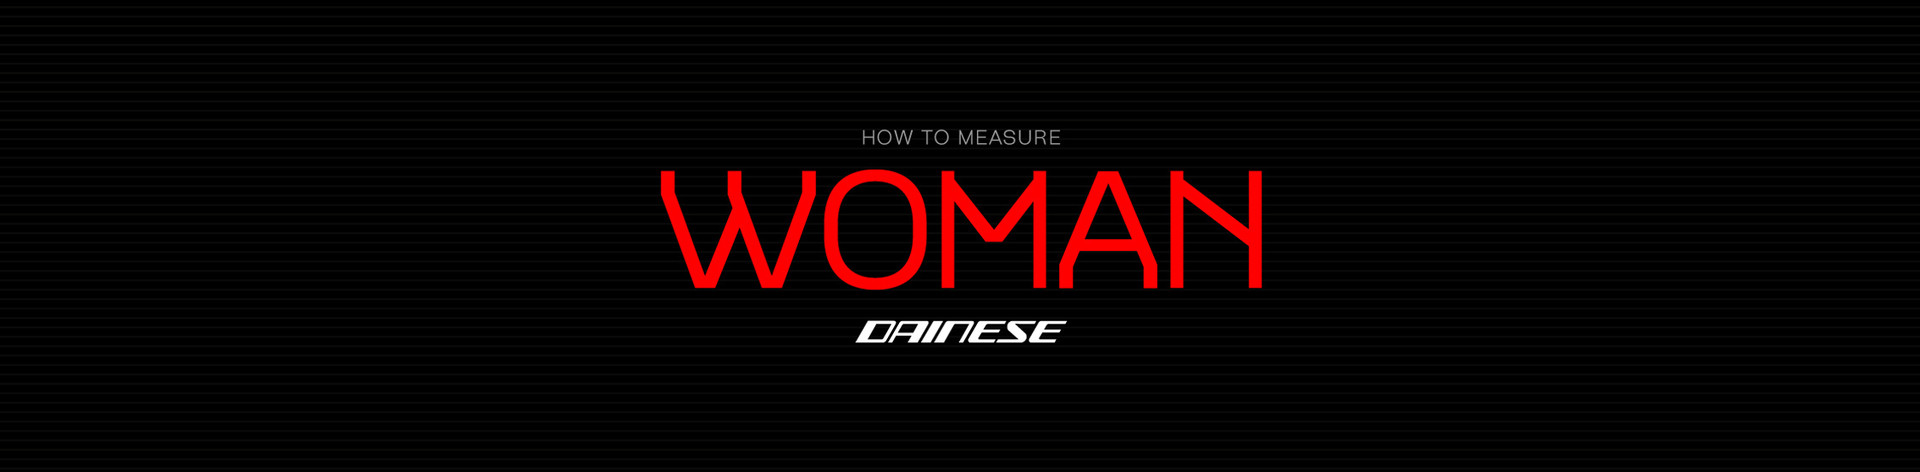 How to measure WOMAN